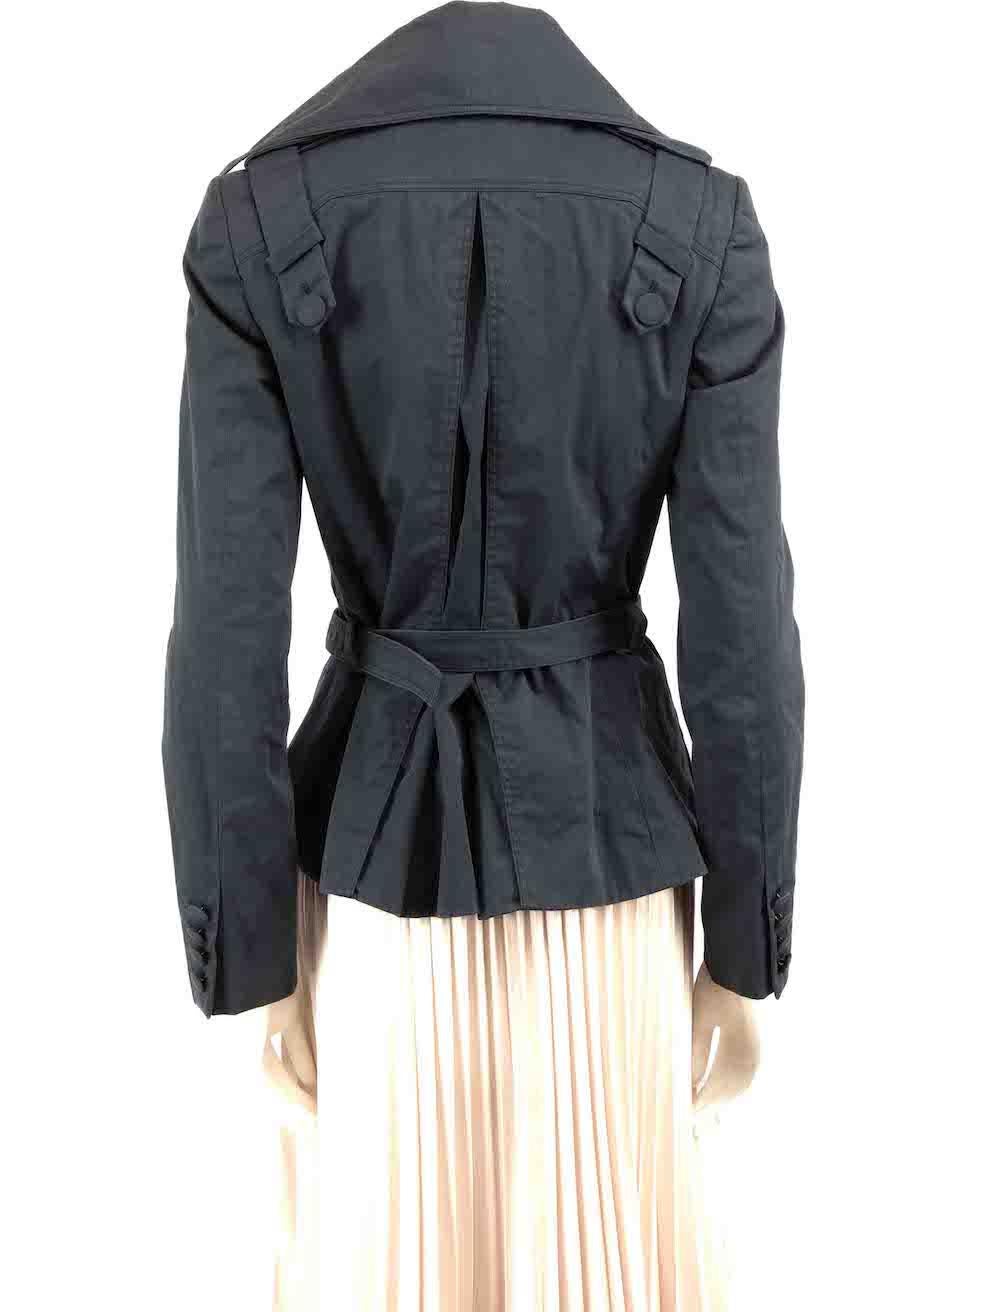 Stella McCartney Navy Double Breasted Trench Coat Size M In Good Condition For Sale In London, GB